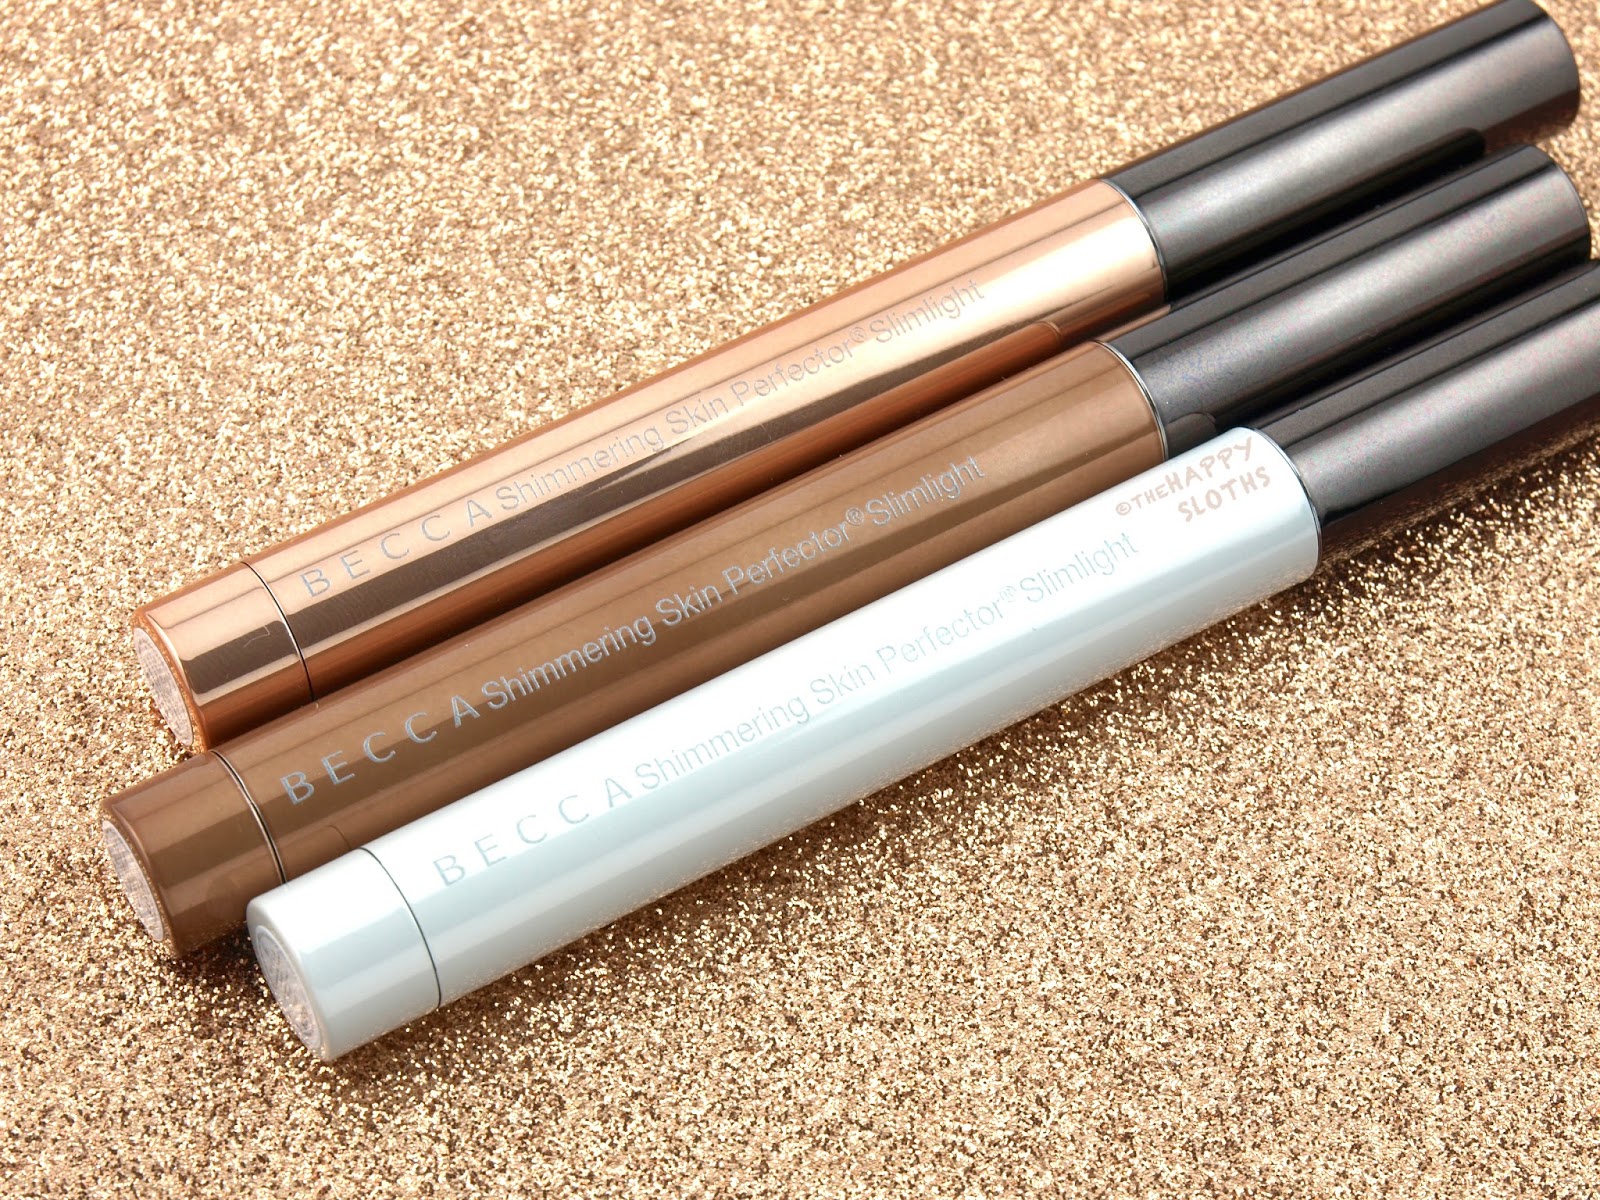 BECCA Shimmering Skin Perfector Slimlight Review and Swatches